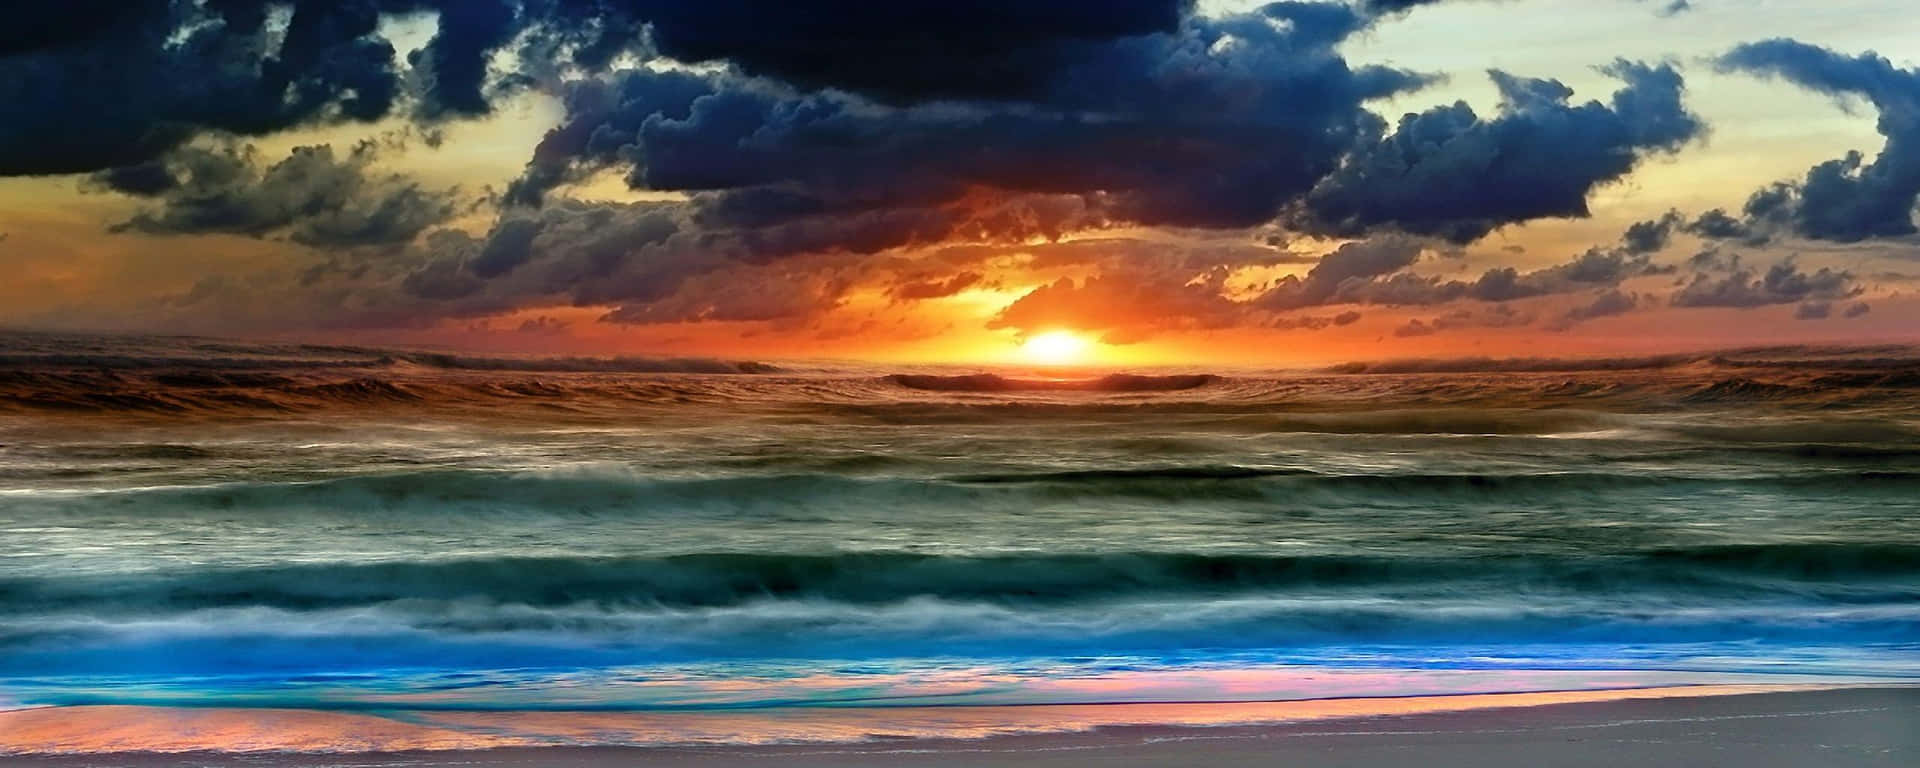 A Painting Of A Sunset Over The Ocean Wallpaper